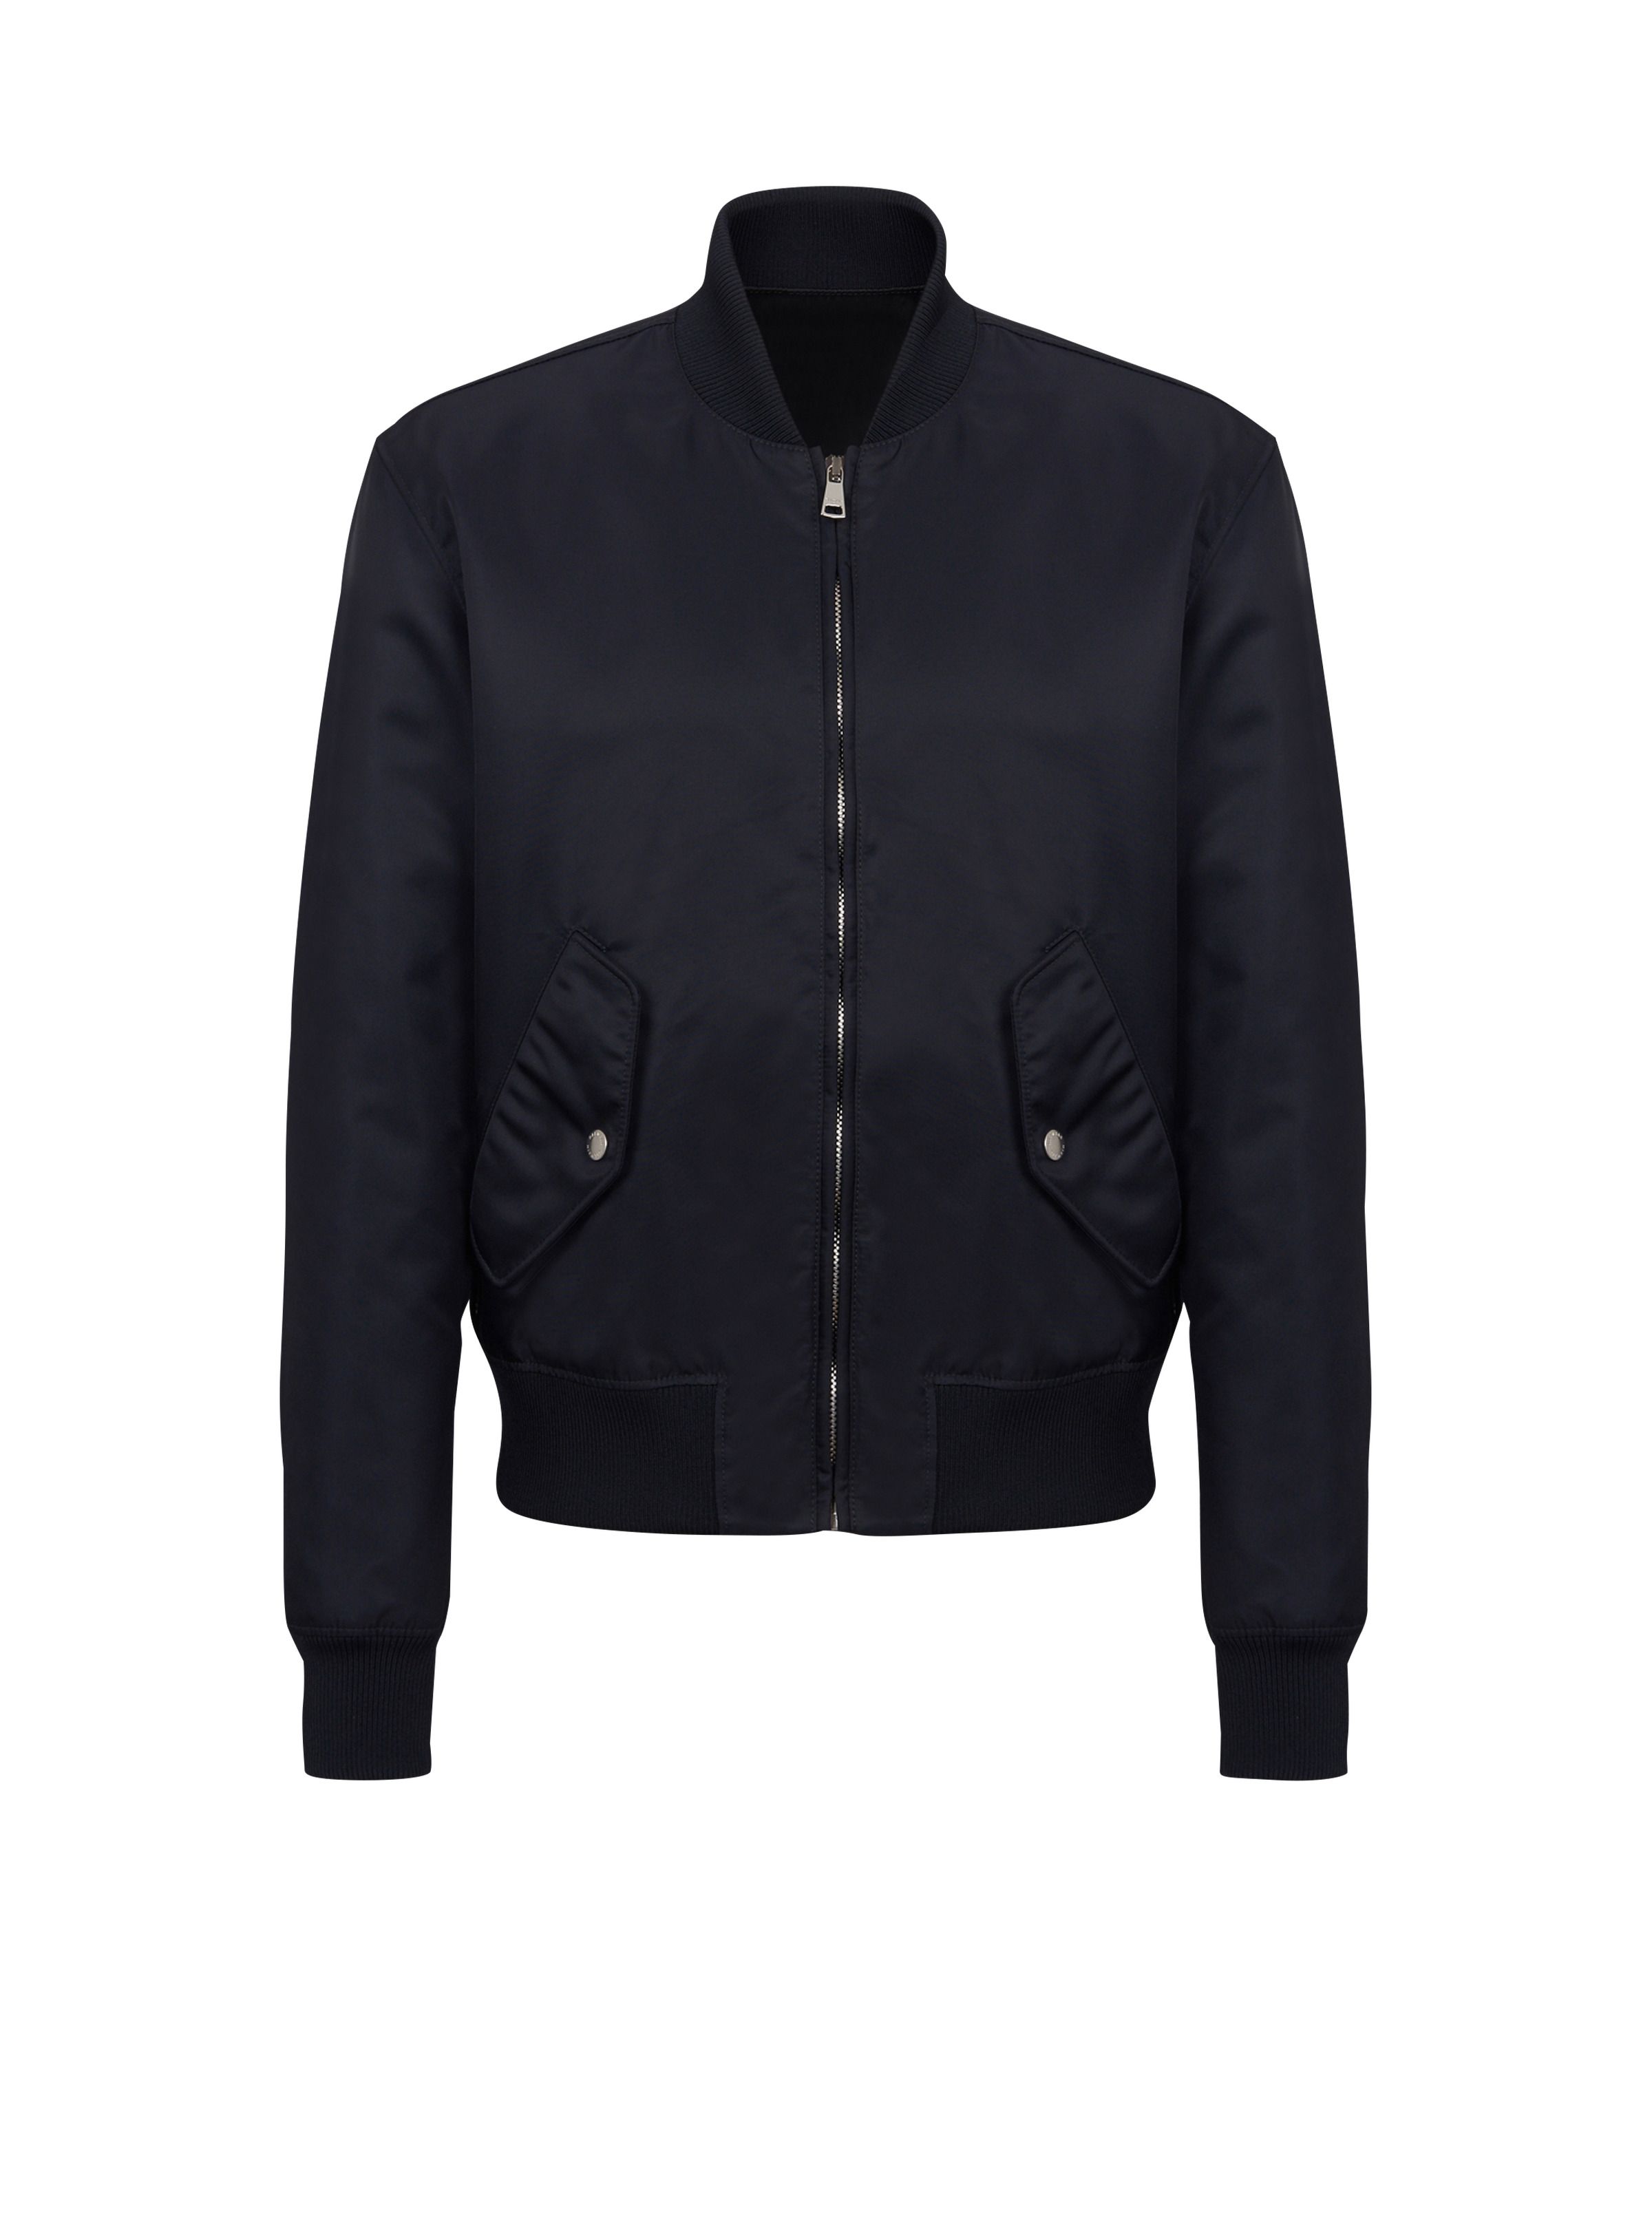 Bomber jacket with Balmain Signature embroidery on the back - 2